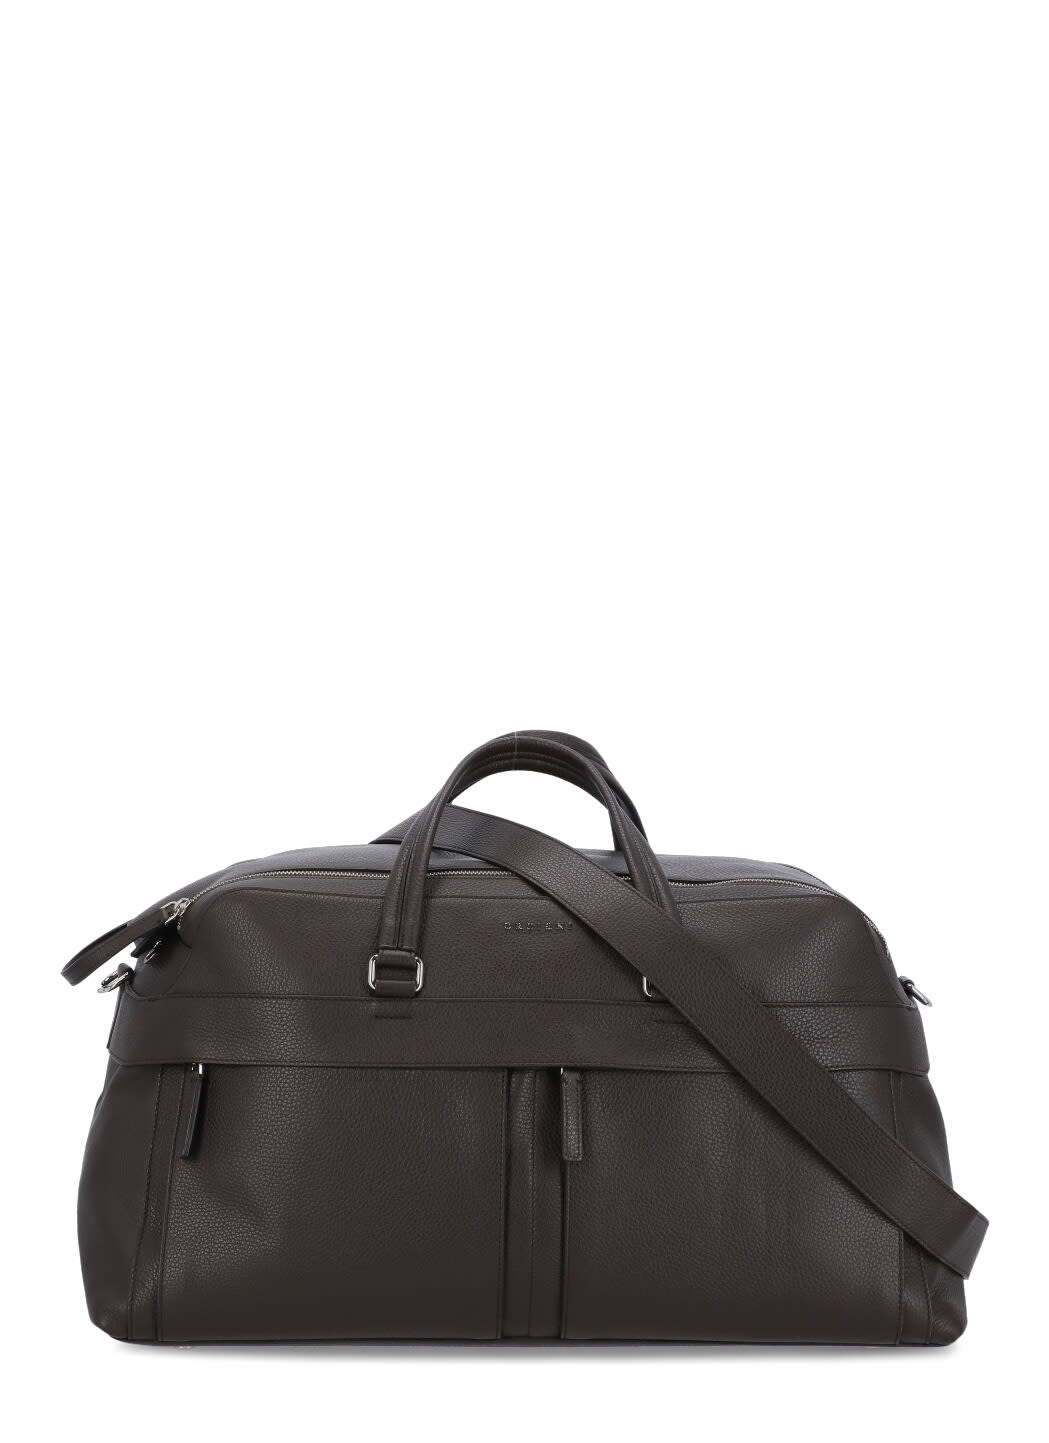 Orciani Micron Pebbled Leather Duffel Bag In Brown